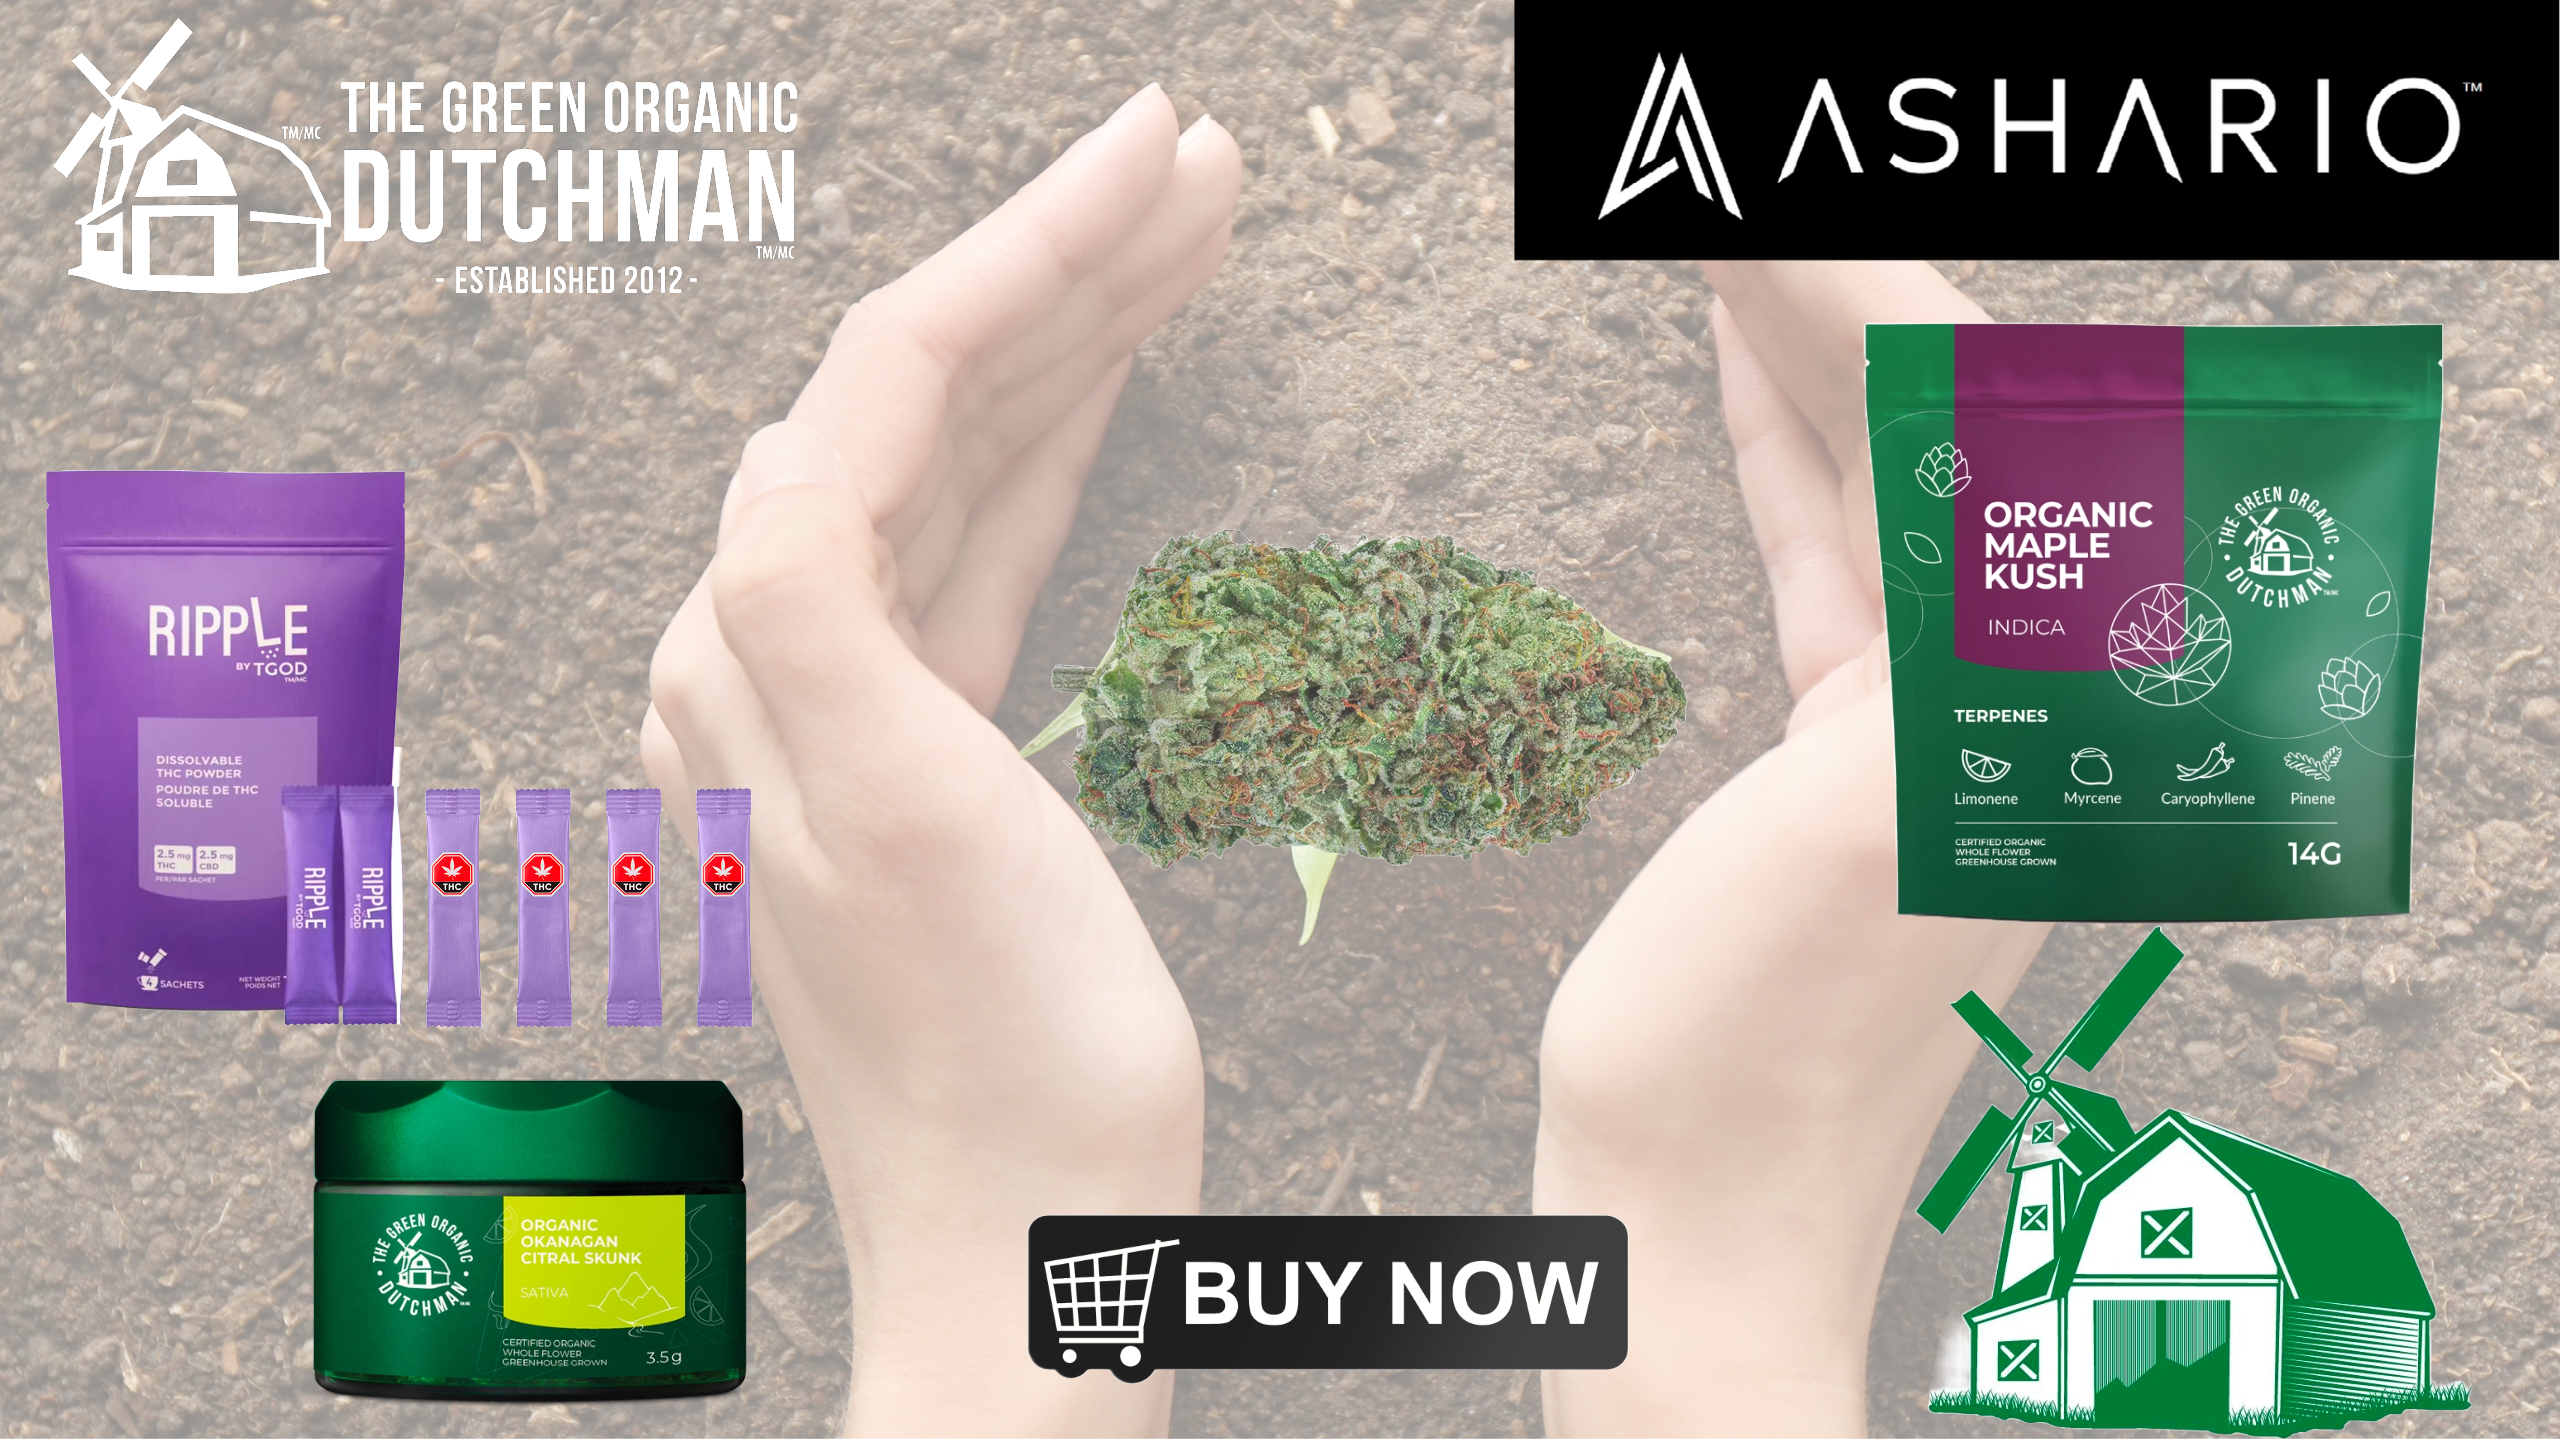 Discover excellence in organic cannabis with The Green Organic Dutchman, featured prominently at Ashario Cannabis.